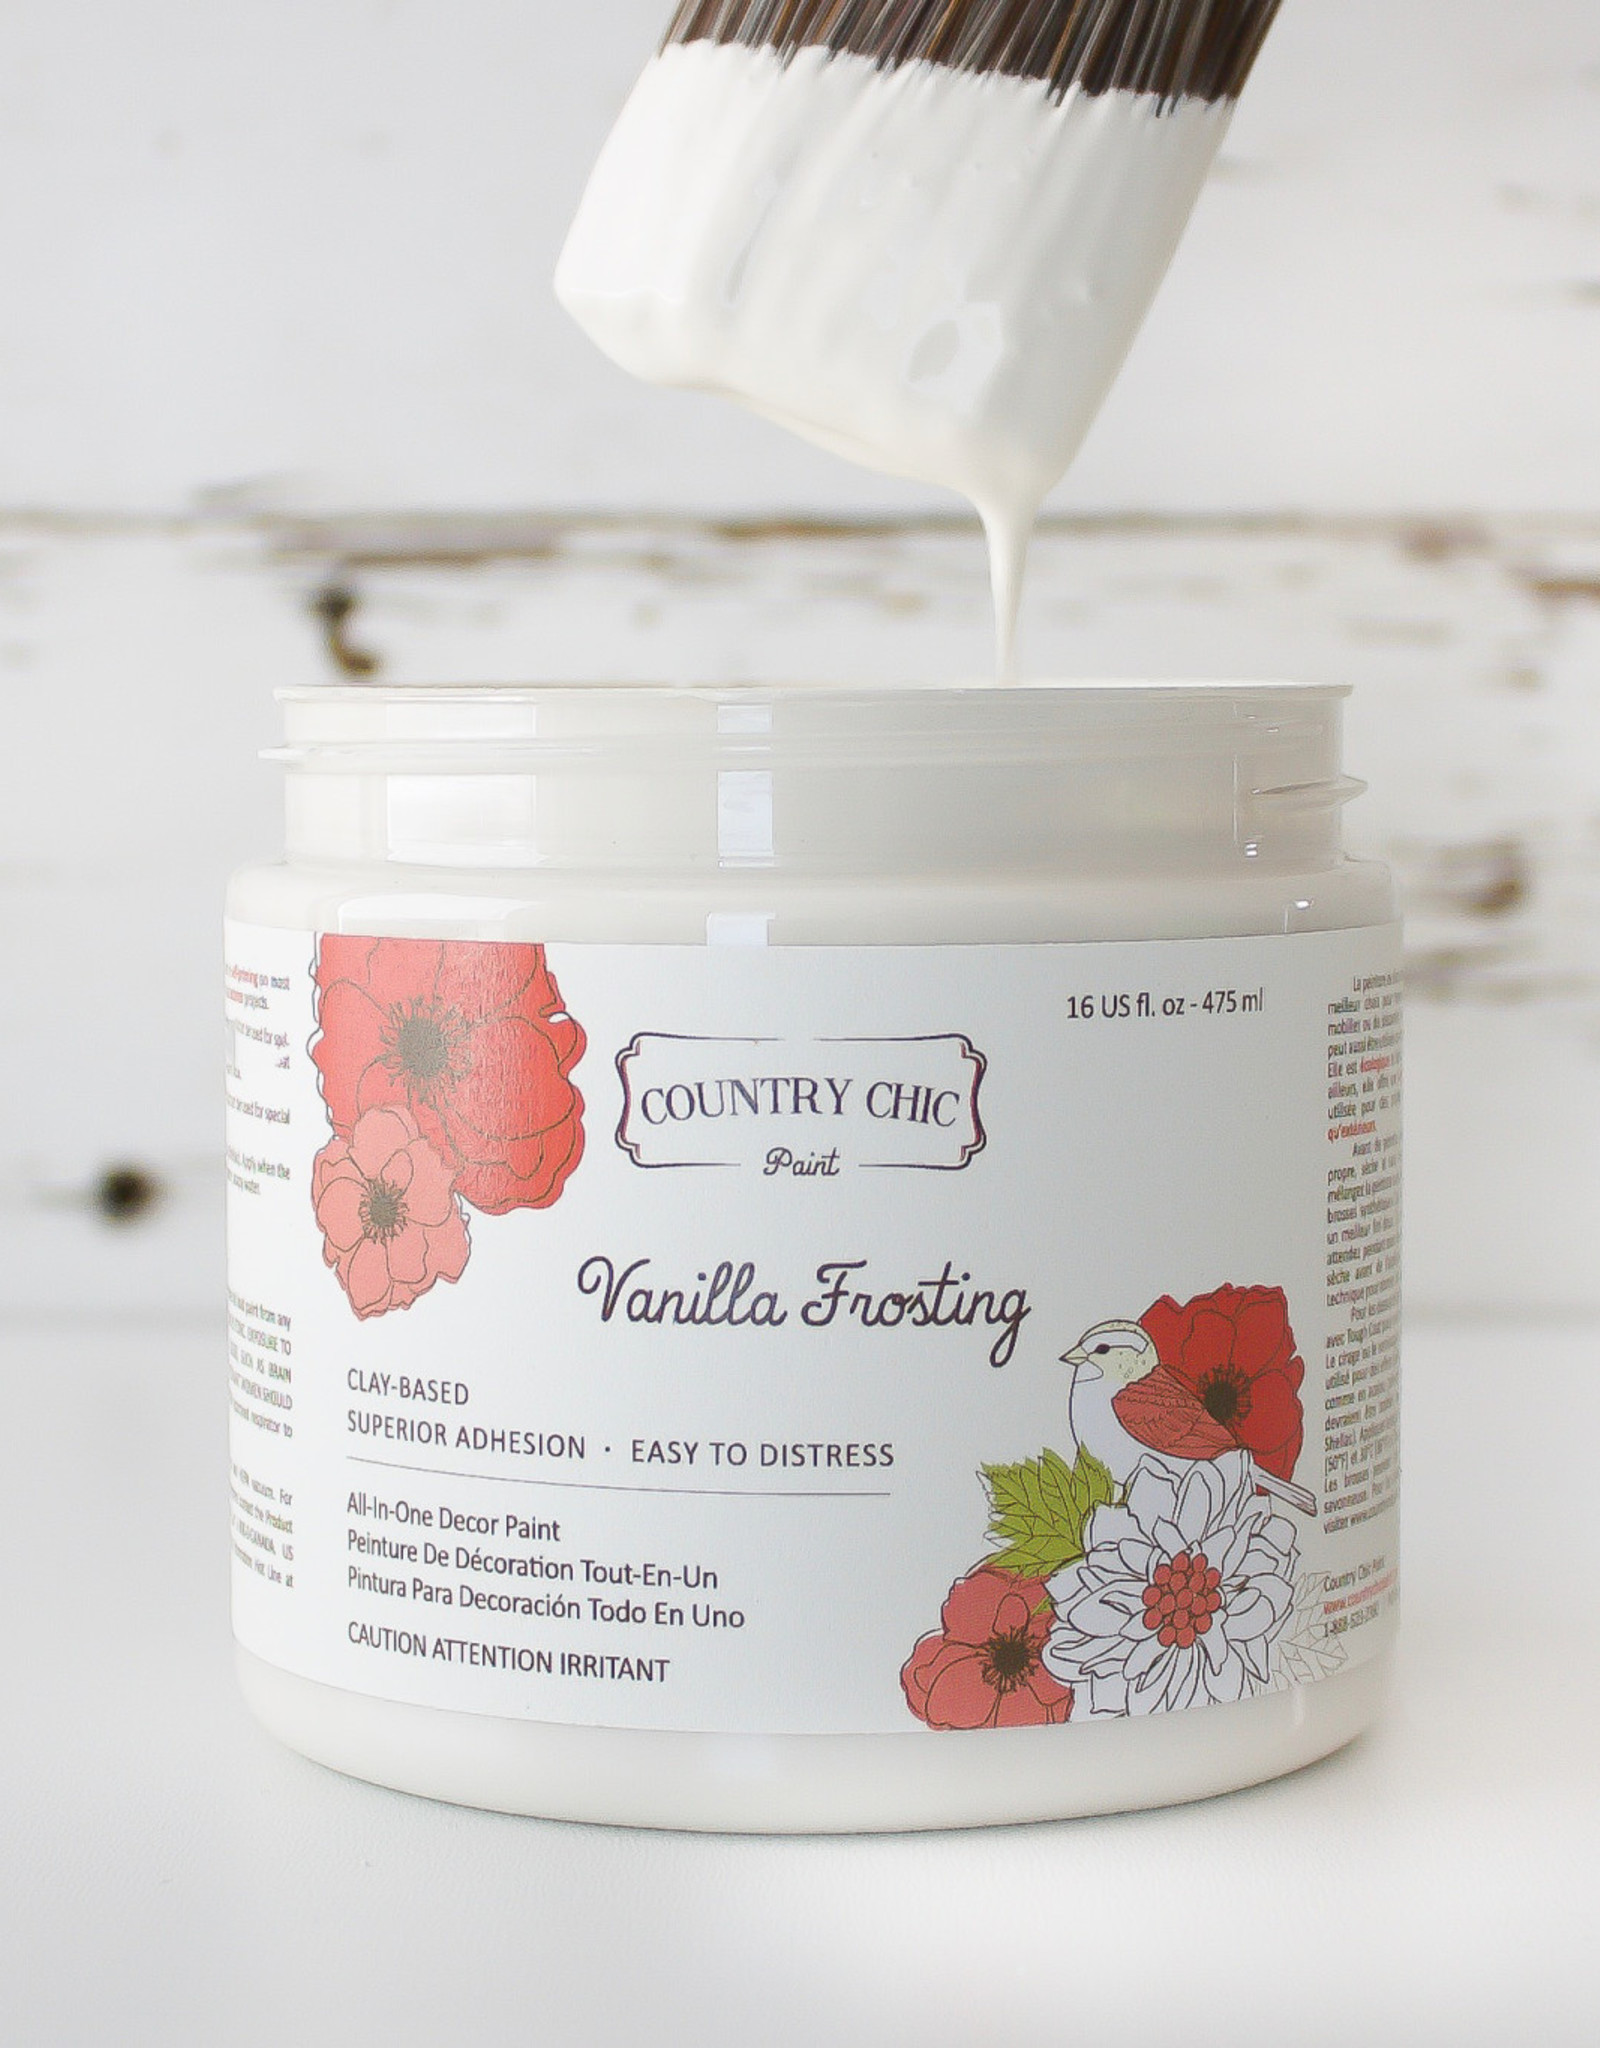 Country Chic Country Chic Paint Quart - 32oz Vanilla Frosting